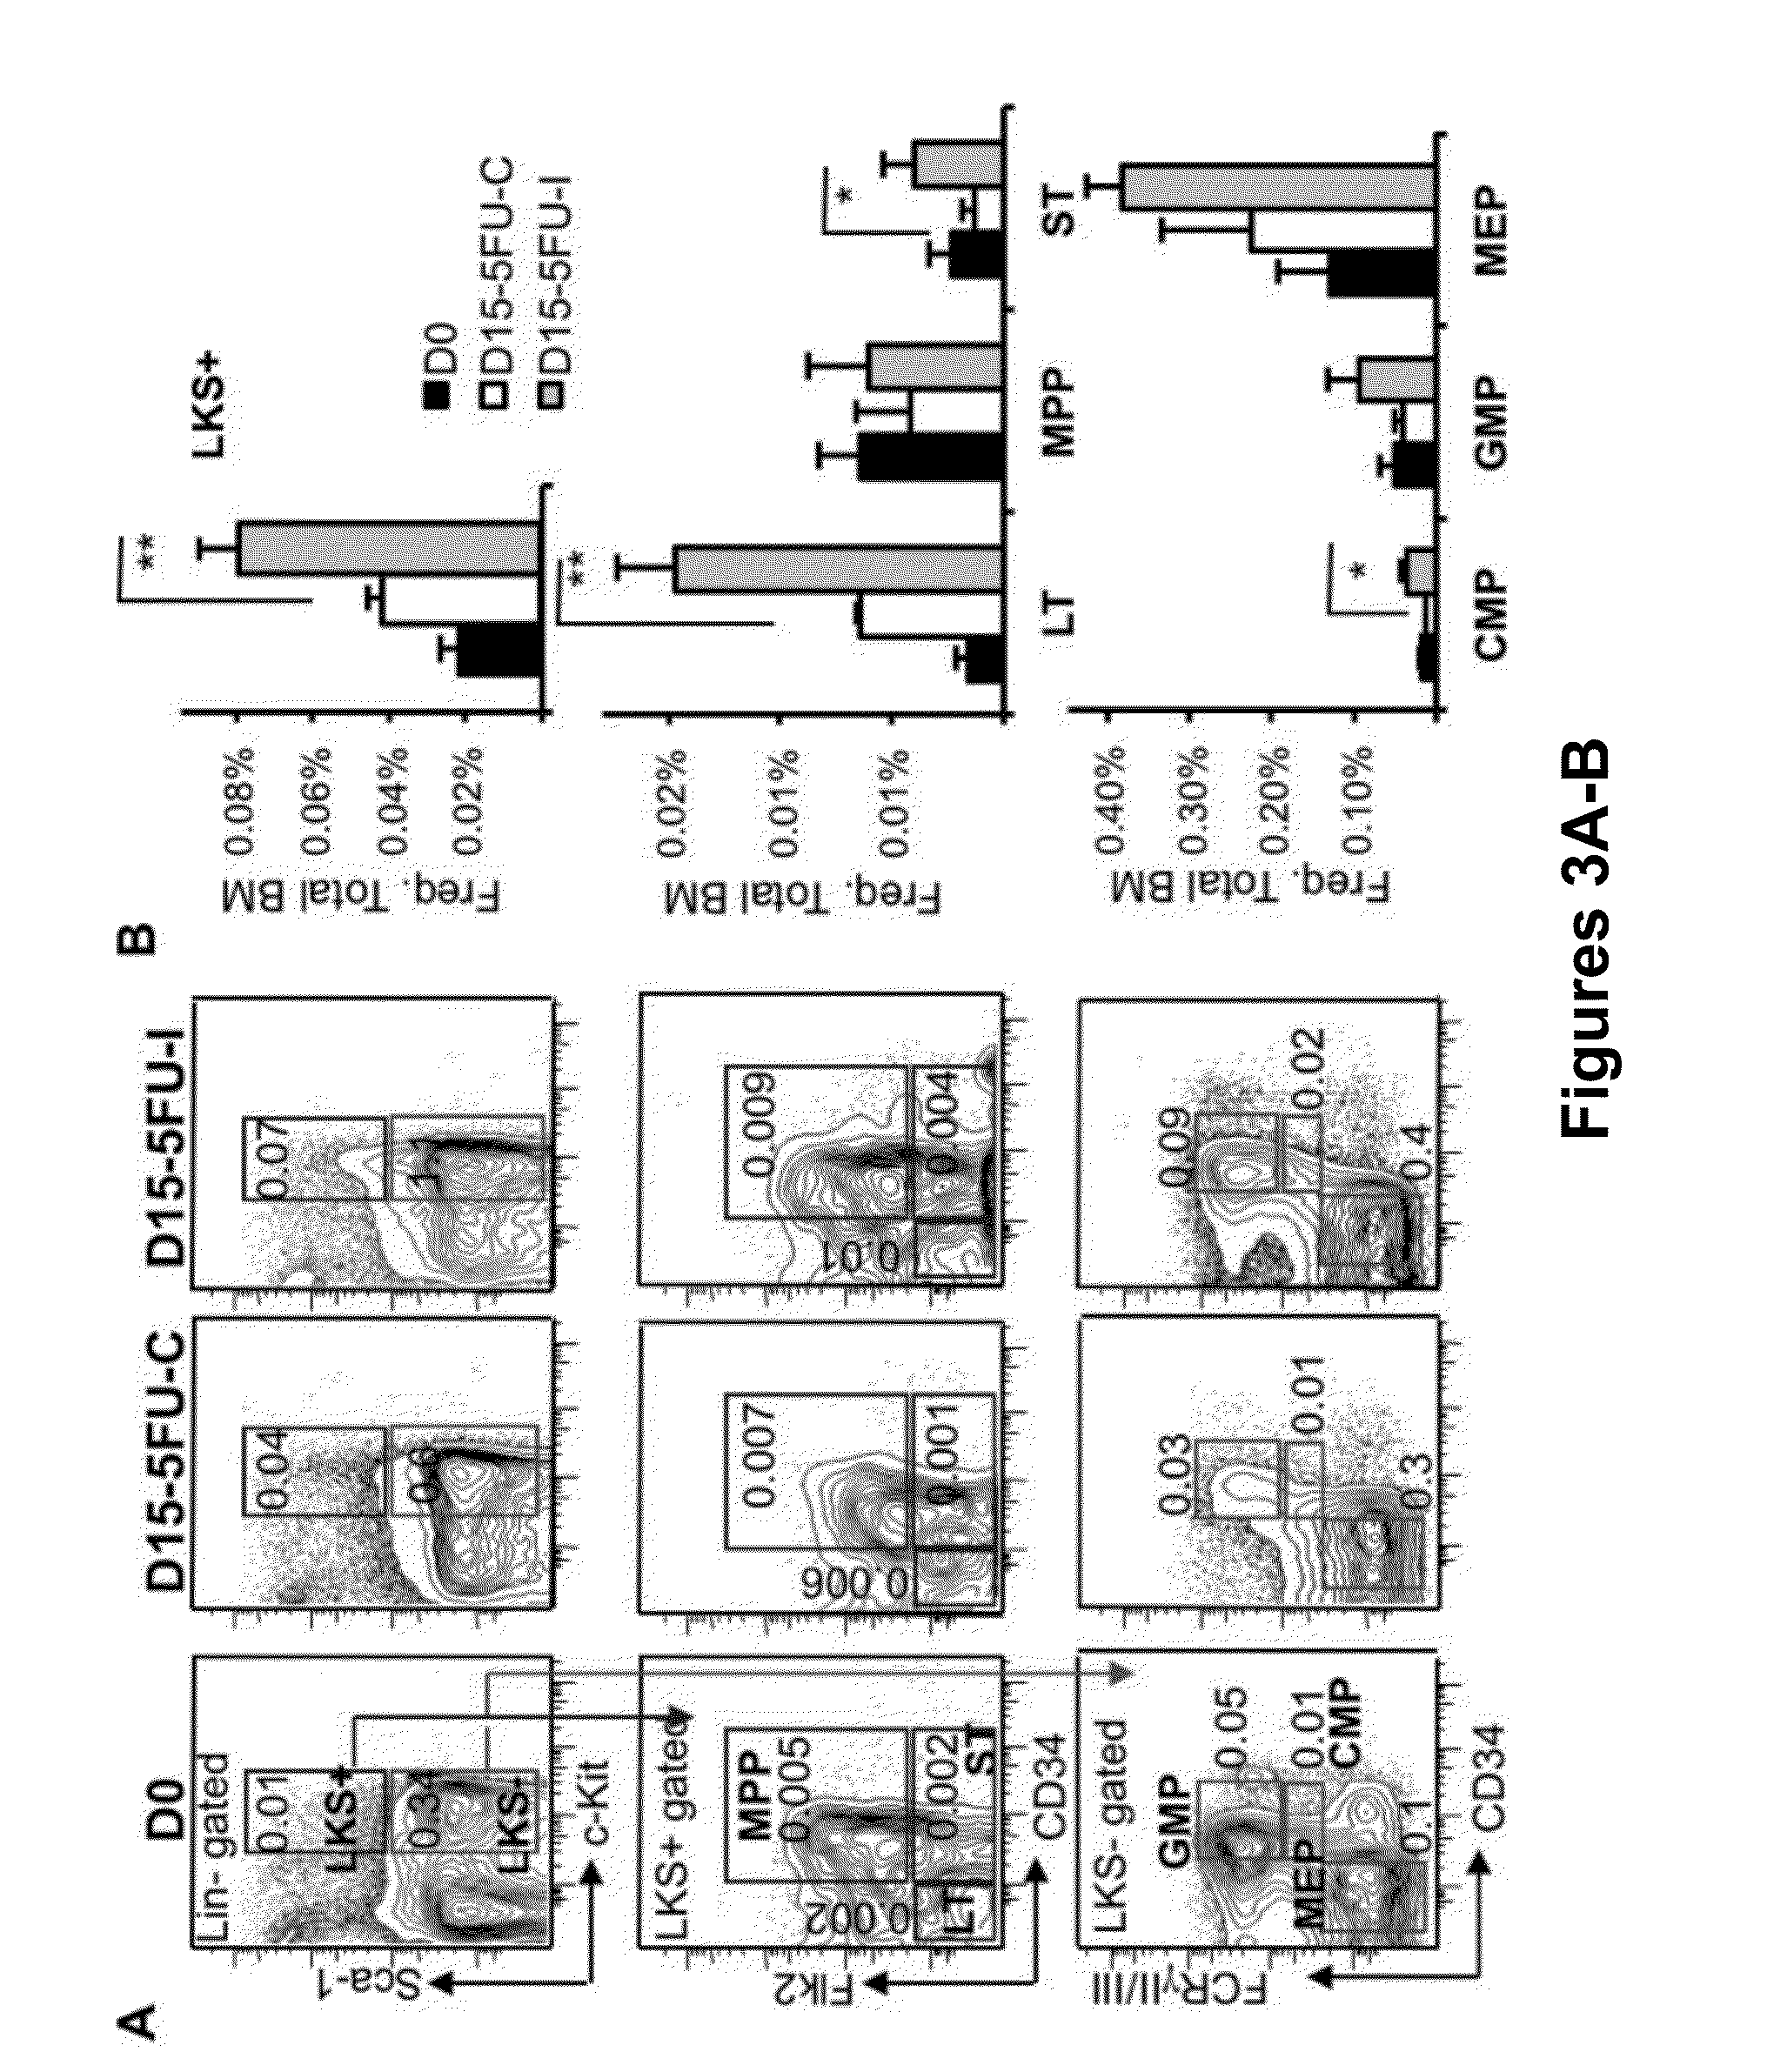 Methods for stimulating hematopoietic recovery by inhibiting TGF beta signaling